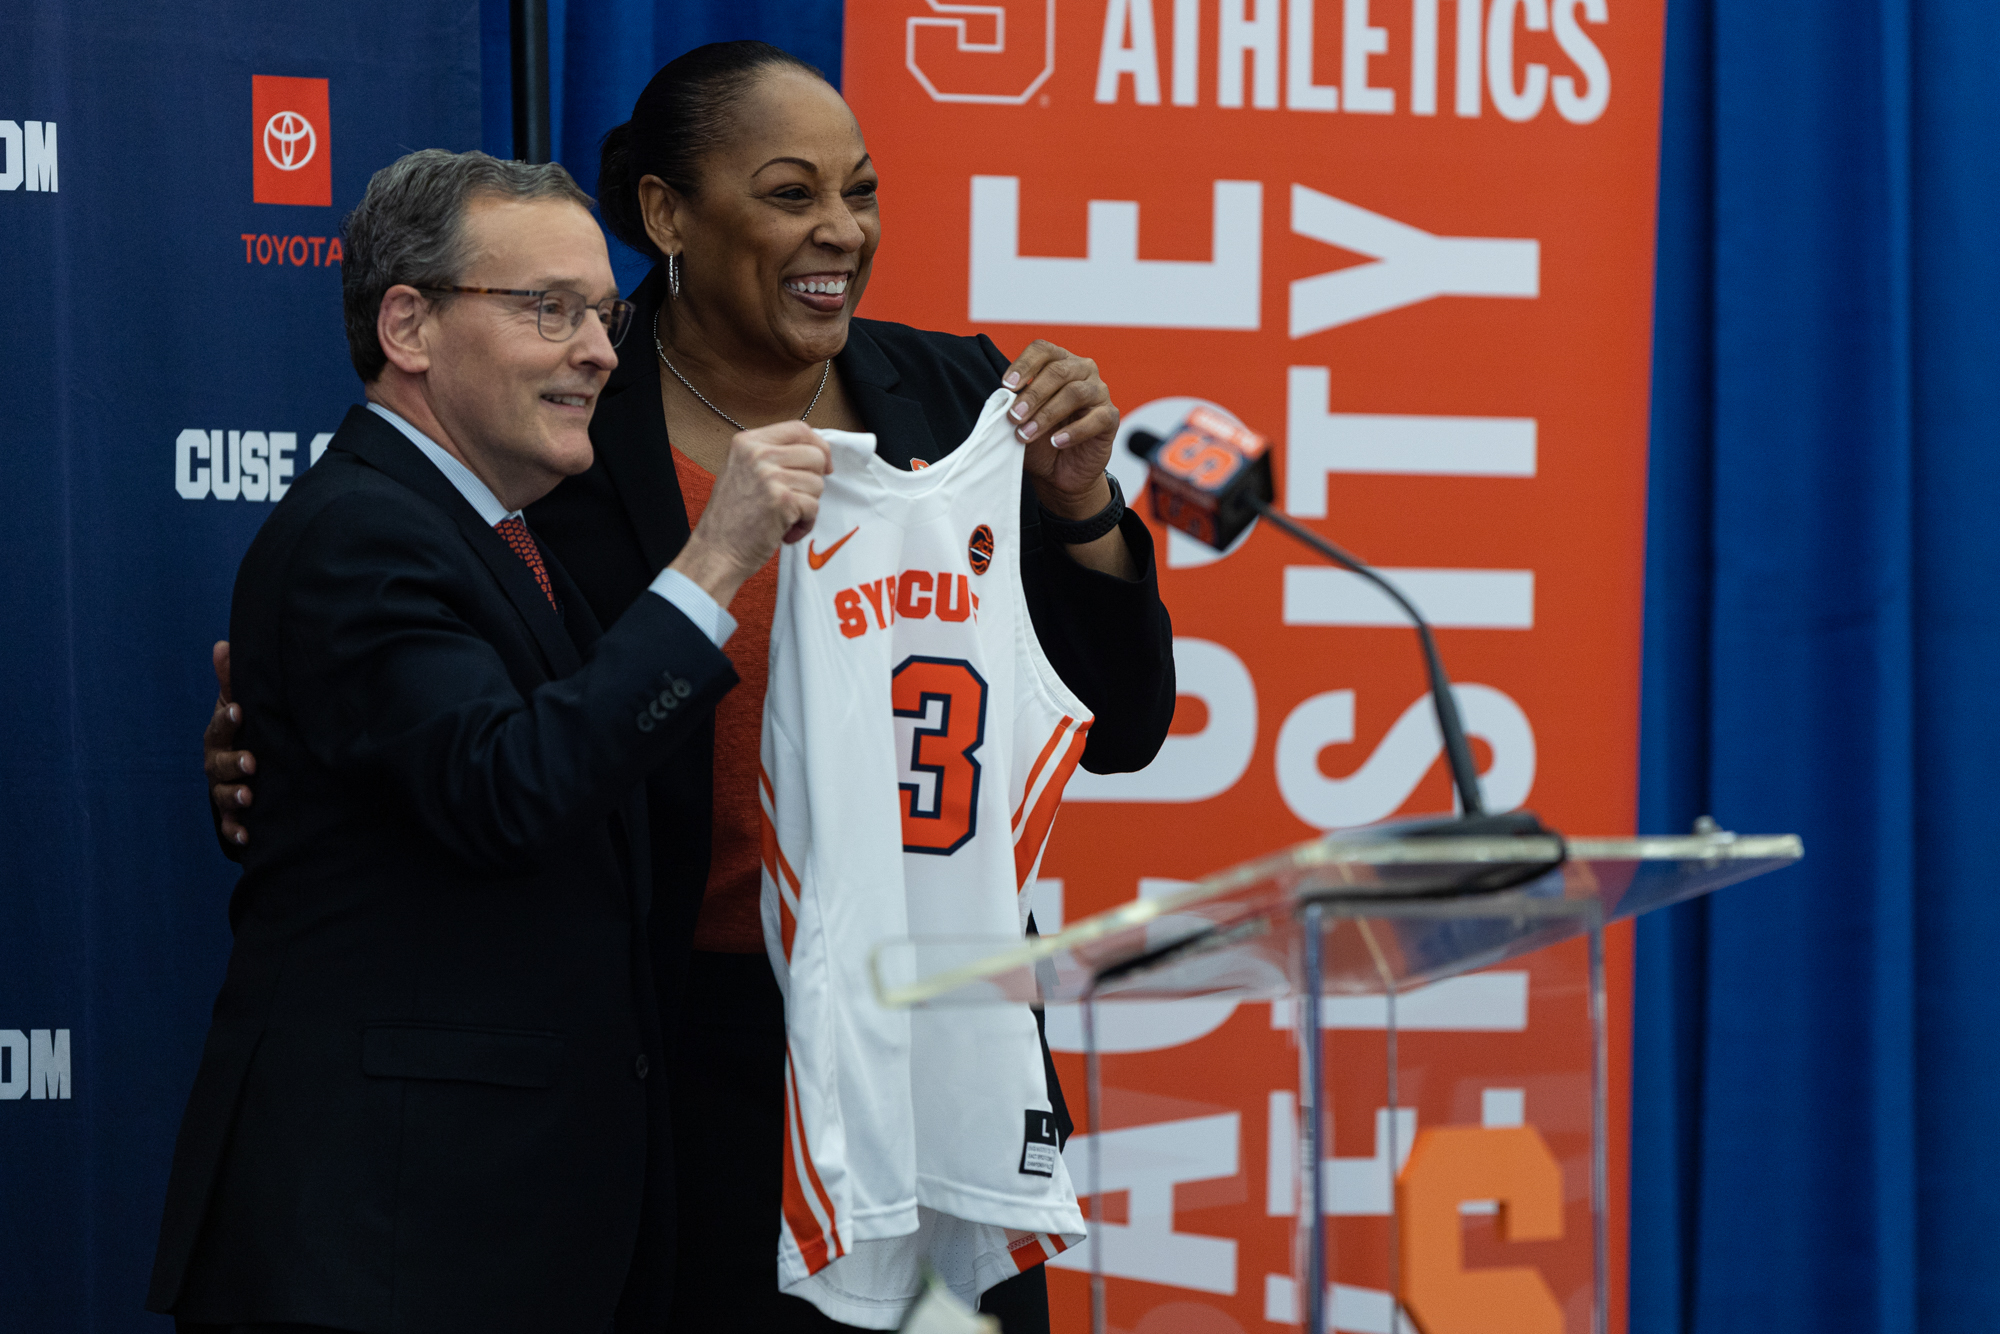 Felisha Legette-Jack and SU athletic director John Wildhack hold up a jersey with Felisha's name on it in the Melo Center on March 28th, 2022.